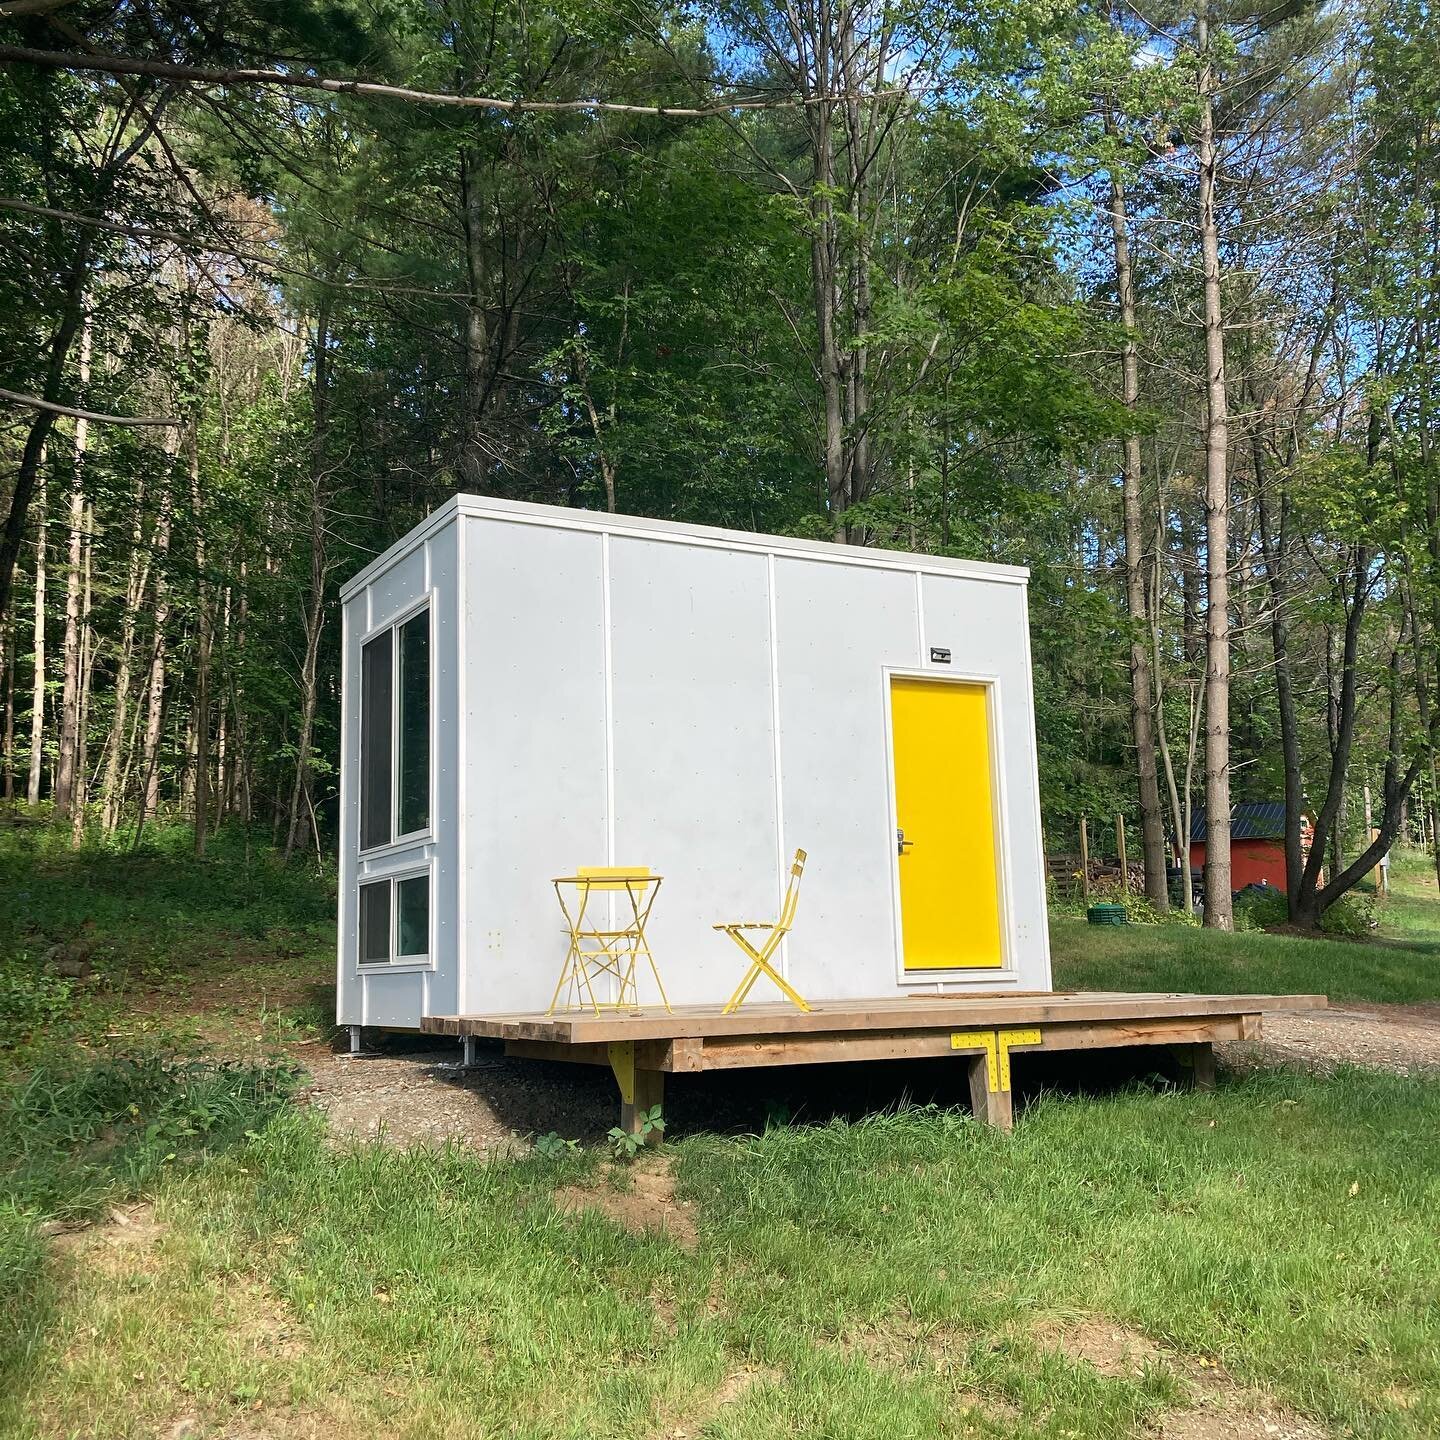 Our original Task Module is on Airbnb in Johnson VT. Leaf peeper season is coming&hellip; Check out @uncommonaccommodations and look them up to book a stay!
. 
.
.
#upendthis #findyourorbit #changetheworld #architecture #sustainability #modular #desi